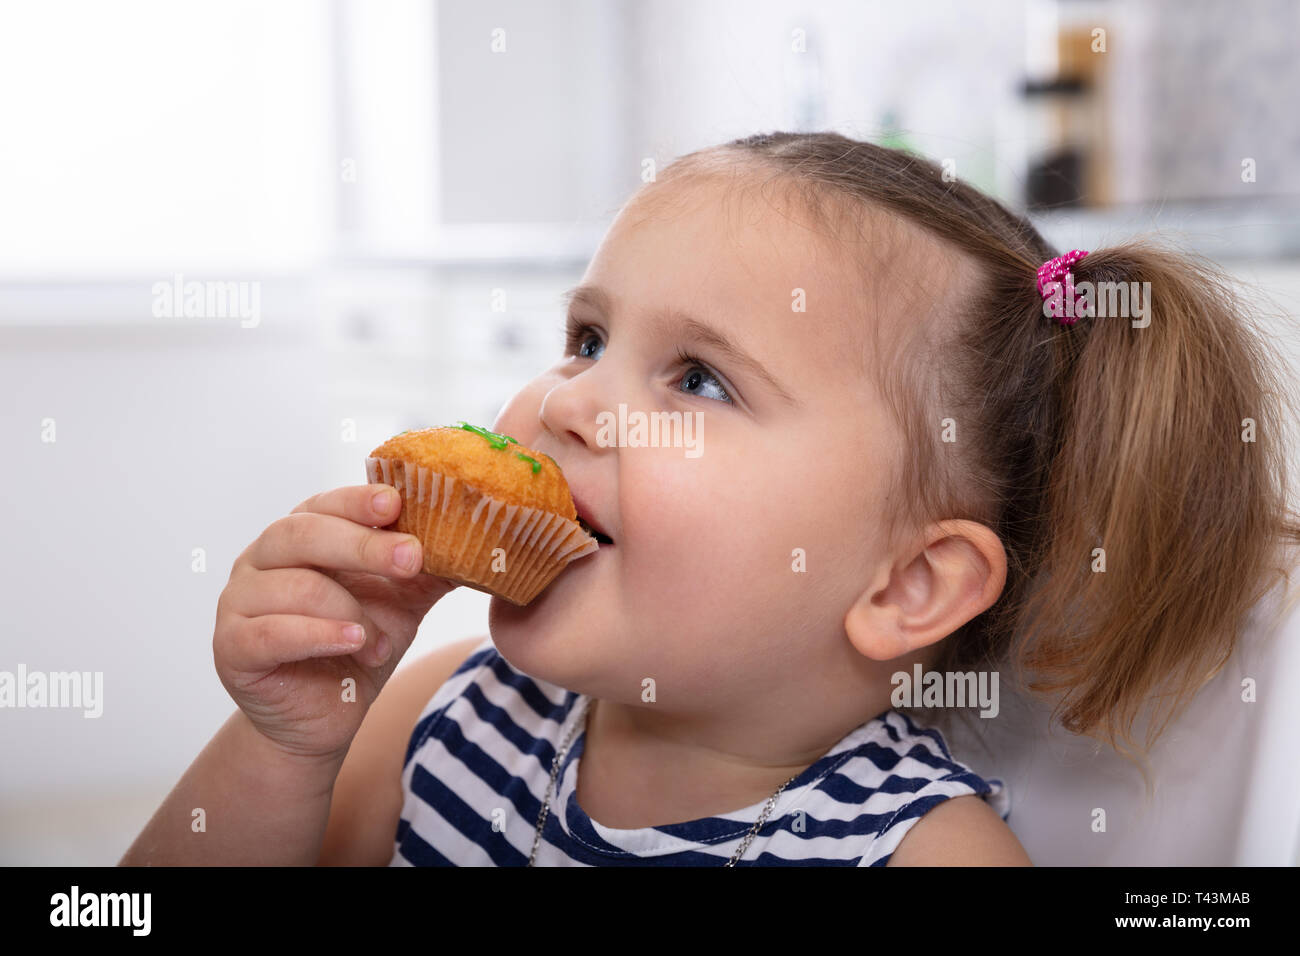 Happy Innocent Girl Taking A Bite Of Delicious Cupcake In The Kitchen Stock Photo